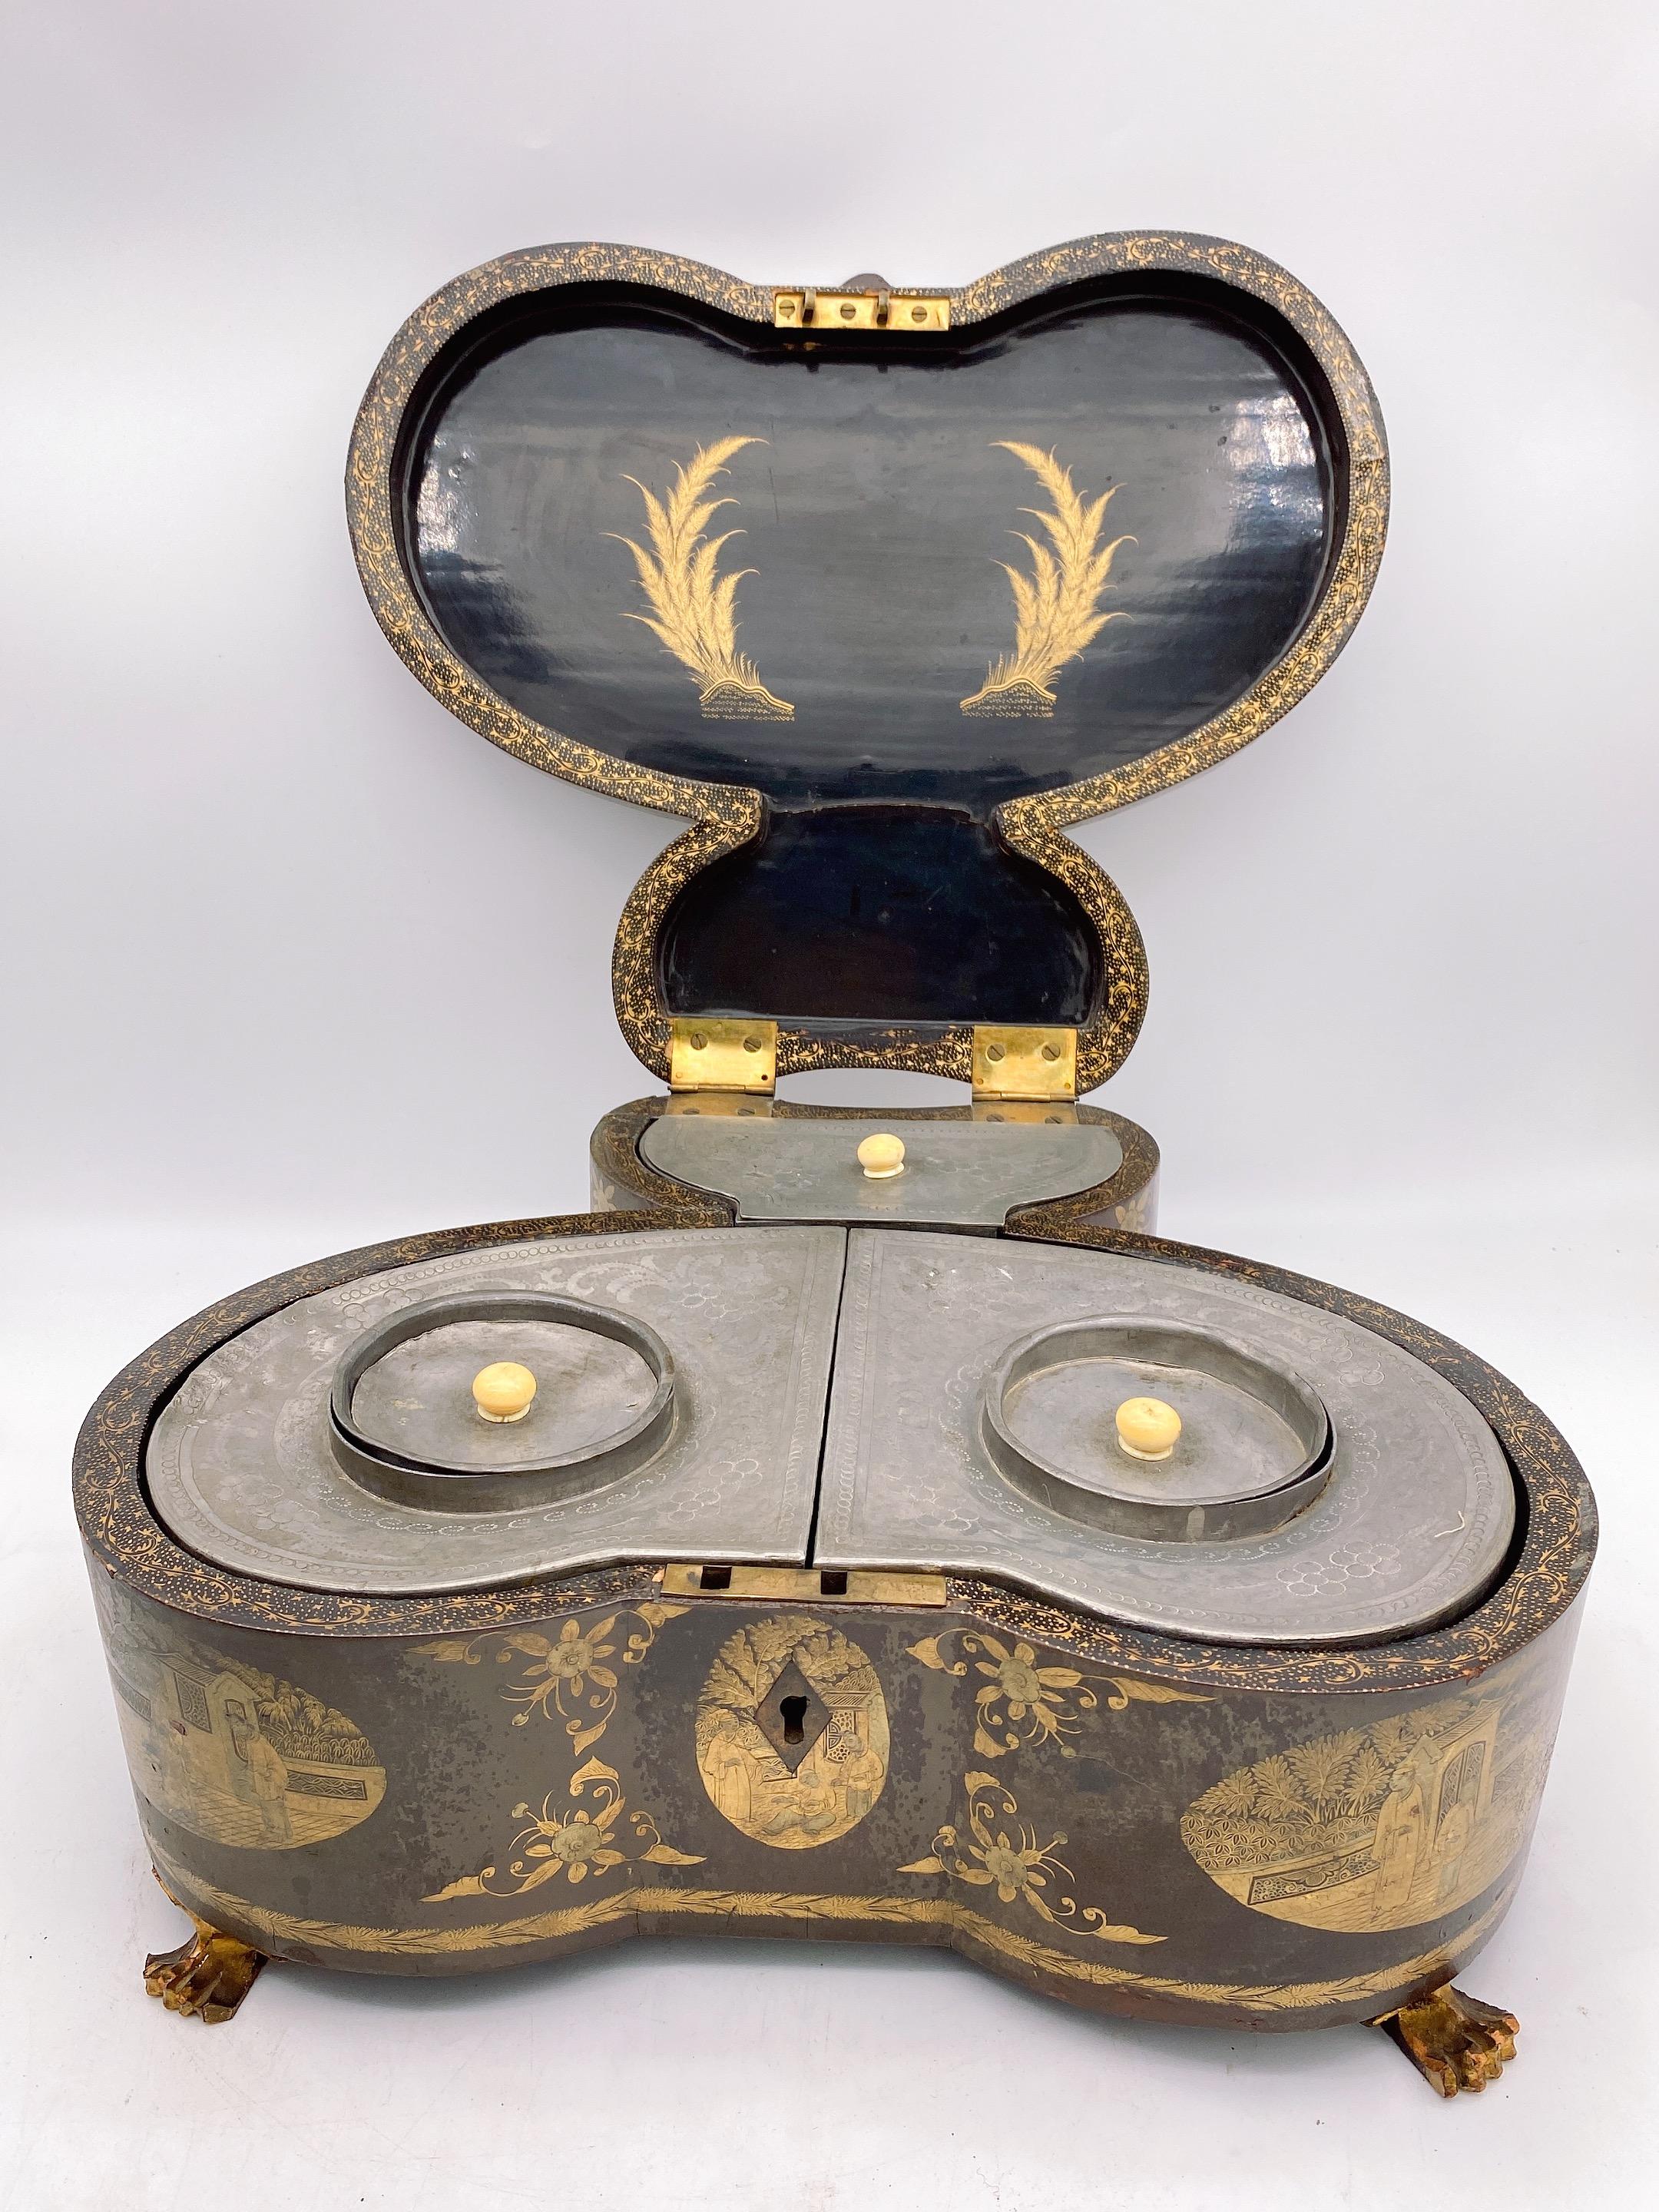 Rare 19th Century Antique Chinese Gilt Lacquer Butterfly Cased Pewter Tea Caddy For Sale 11